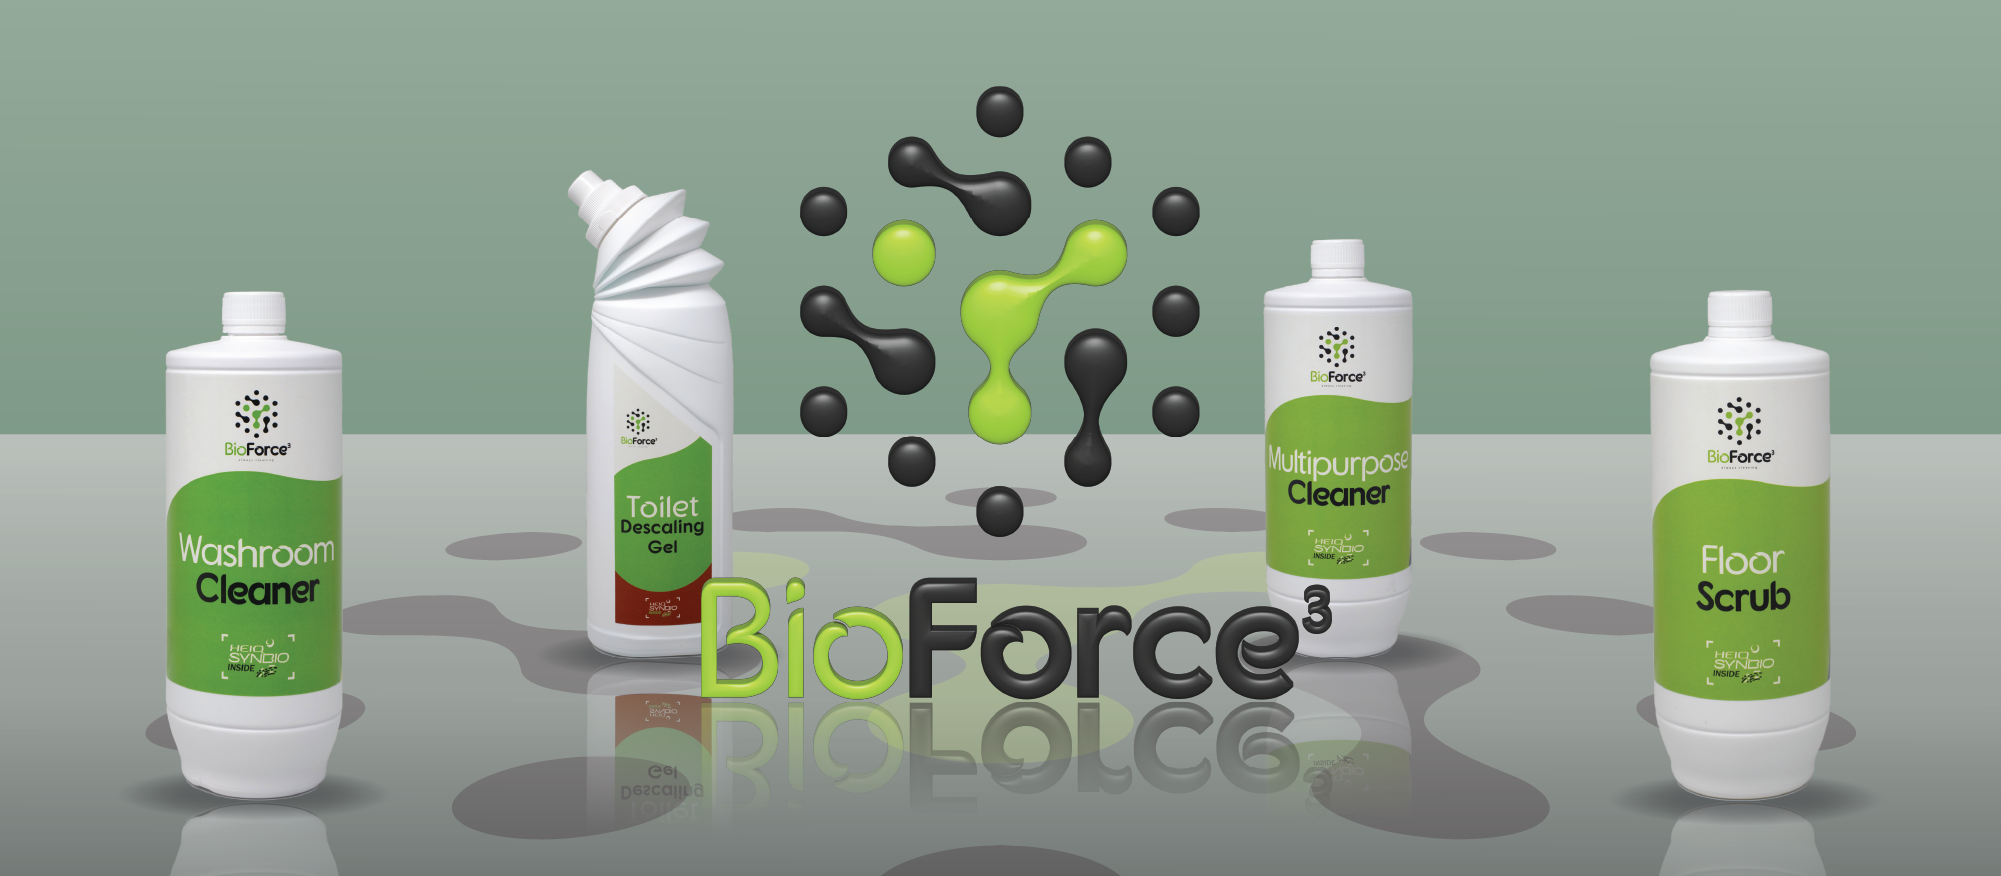 BioForce3. Professional synbiotic cleaning products.